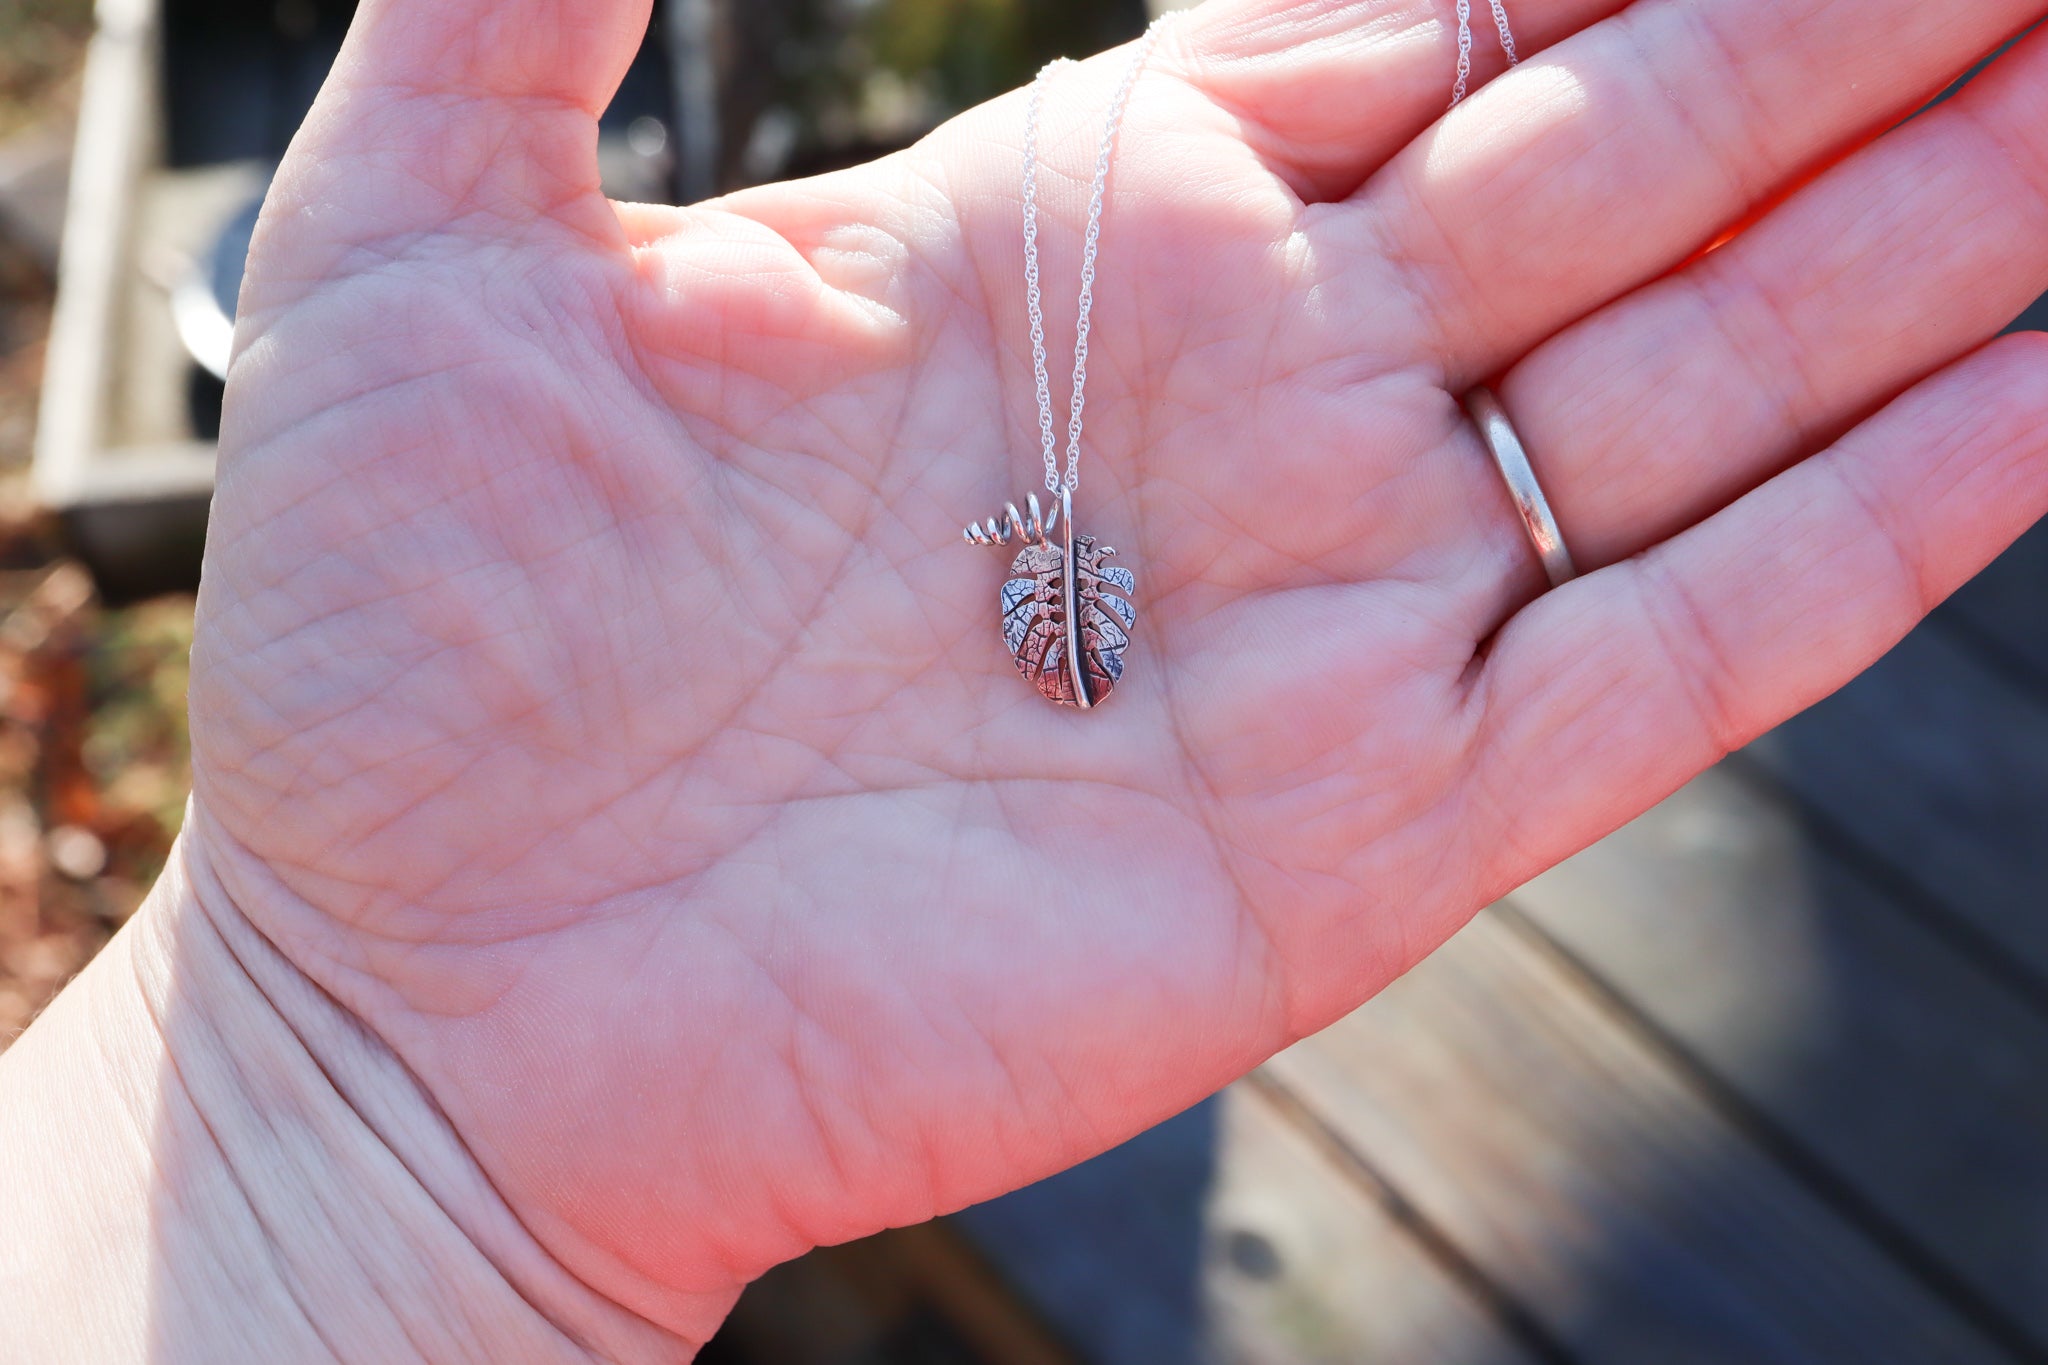 A small sterling silver monstera deliciosa necklace being shown in someone's hand for size scale.